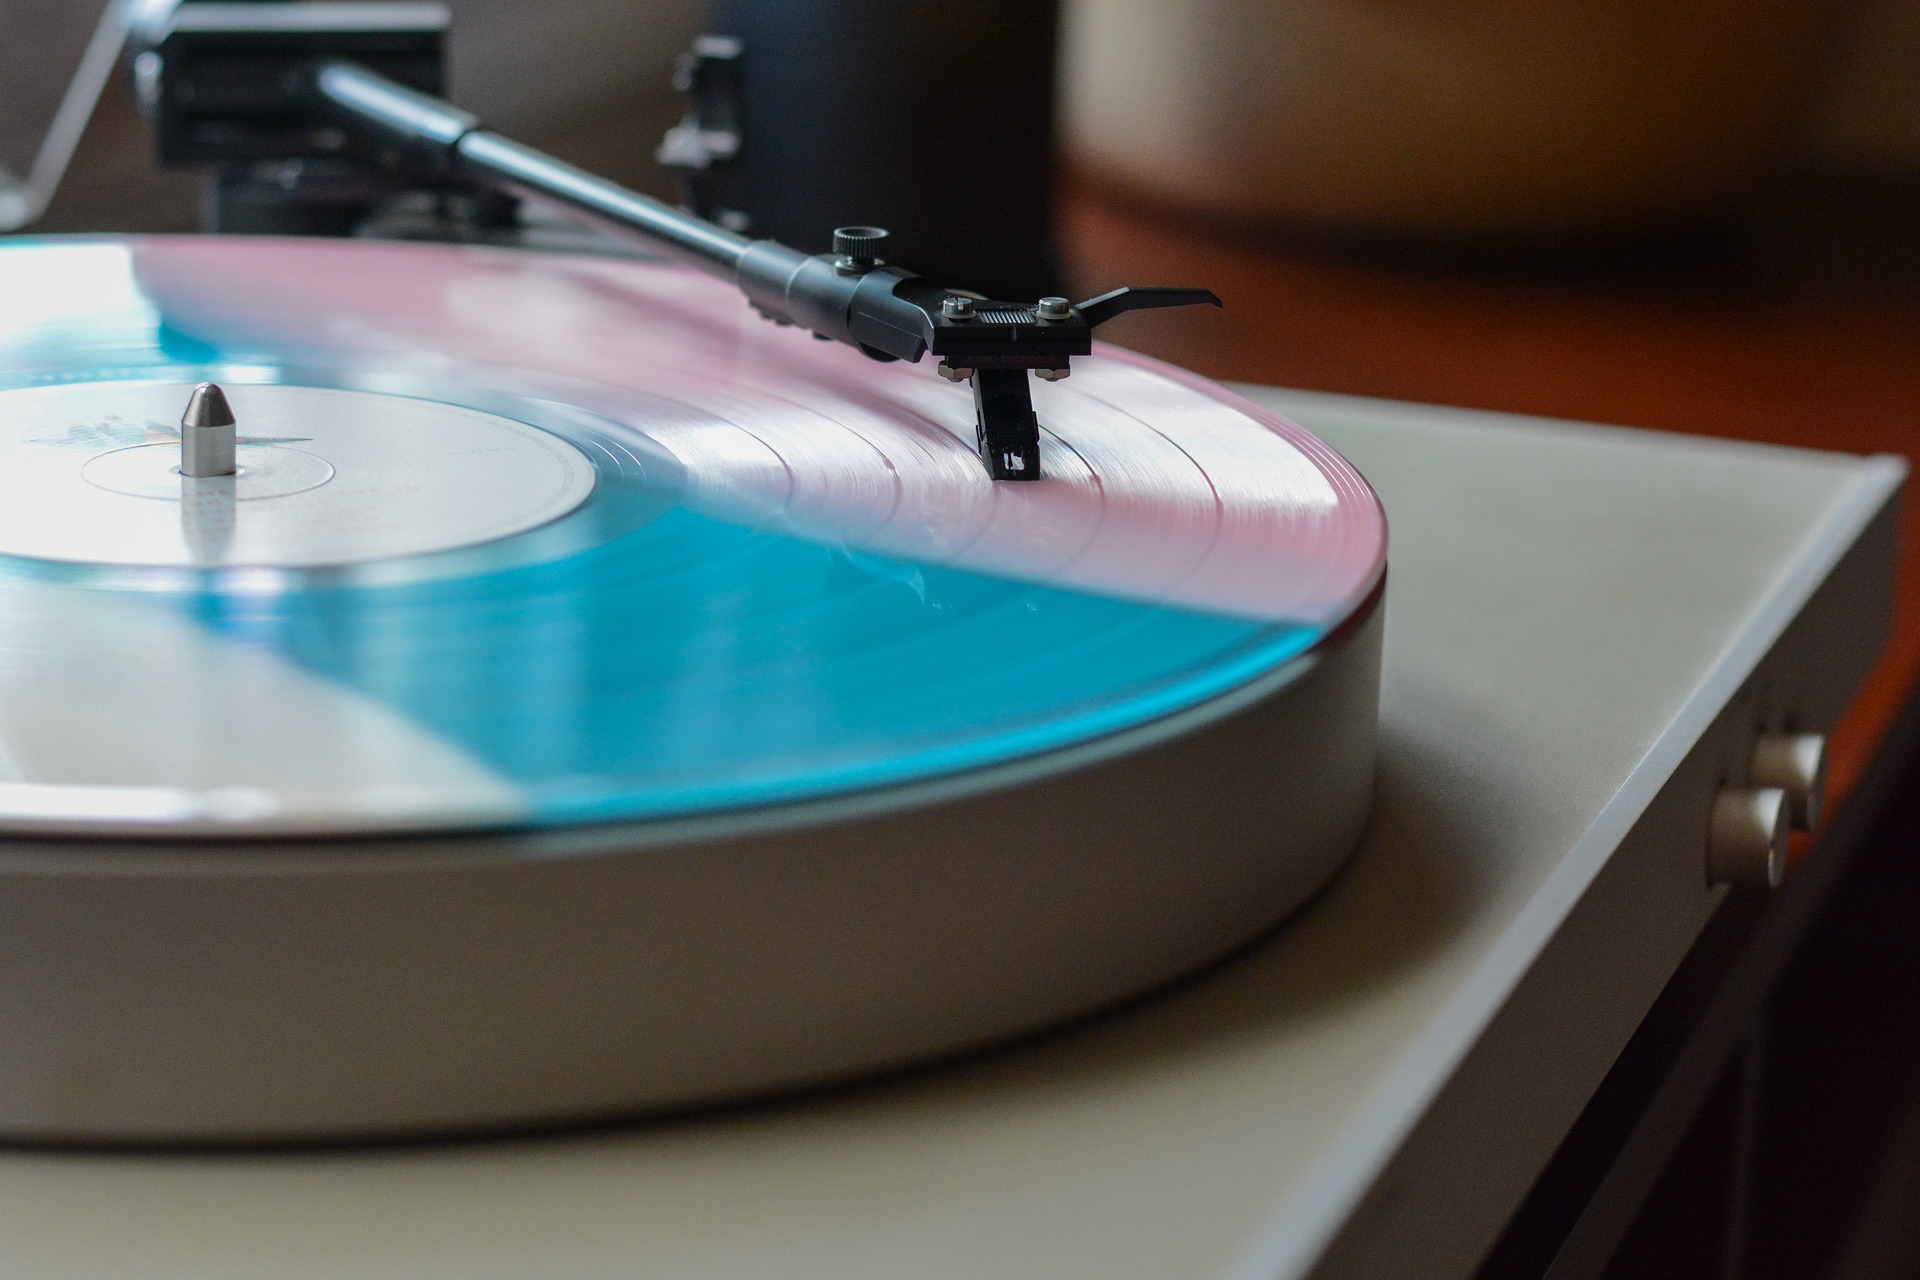 Do you want to enjoy the nostalgic sound of a record player?